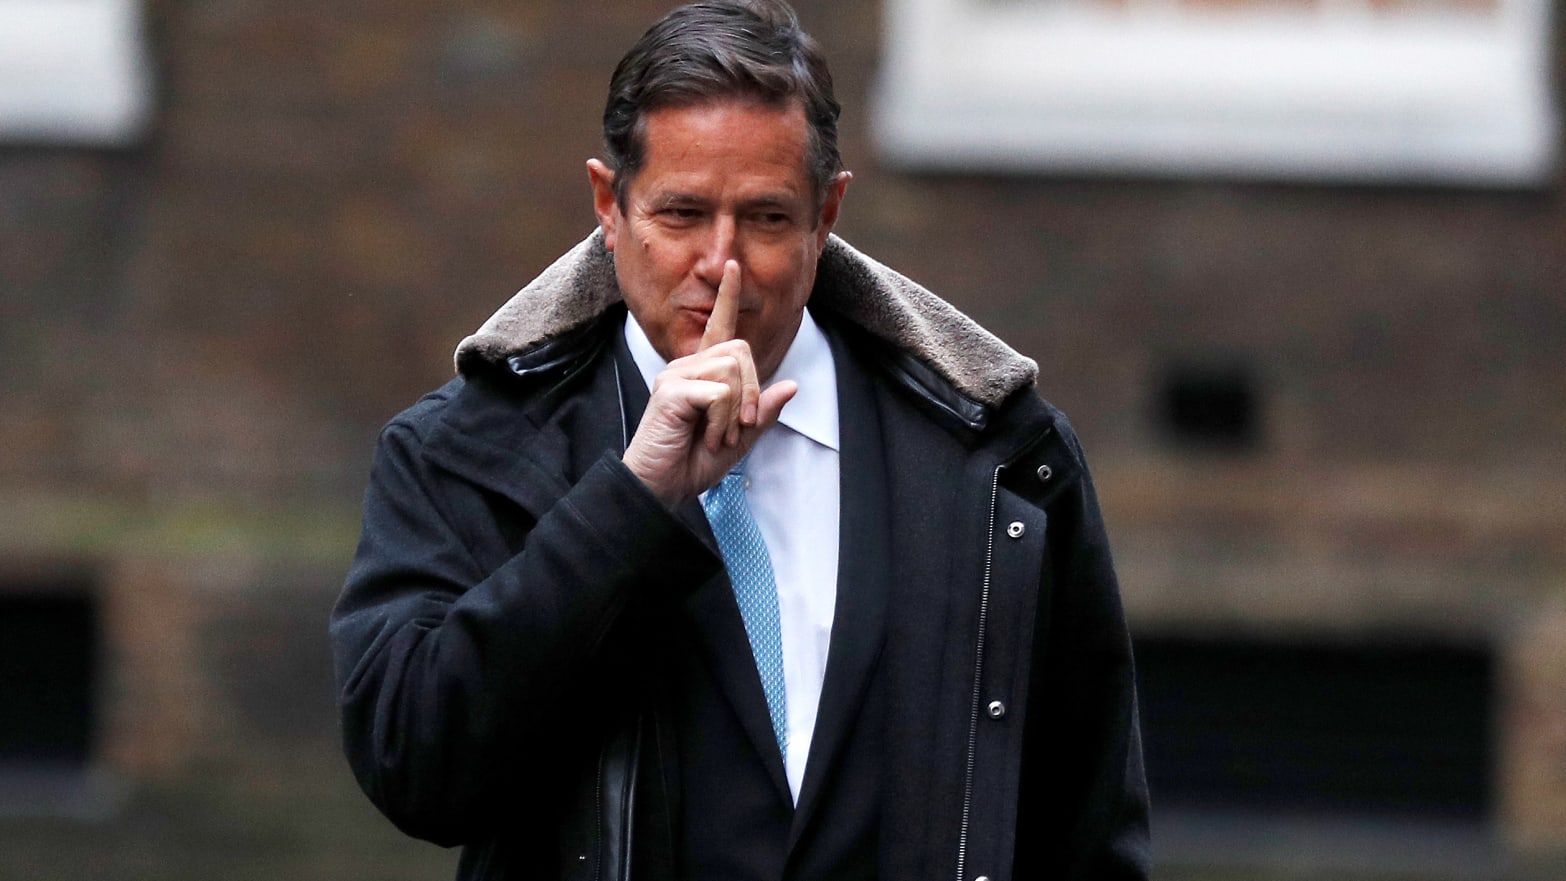 Jes Staley arrives at 10 Downing Street in London in 2018.